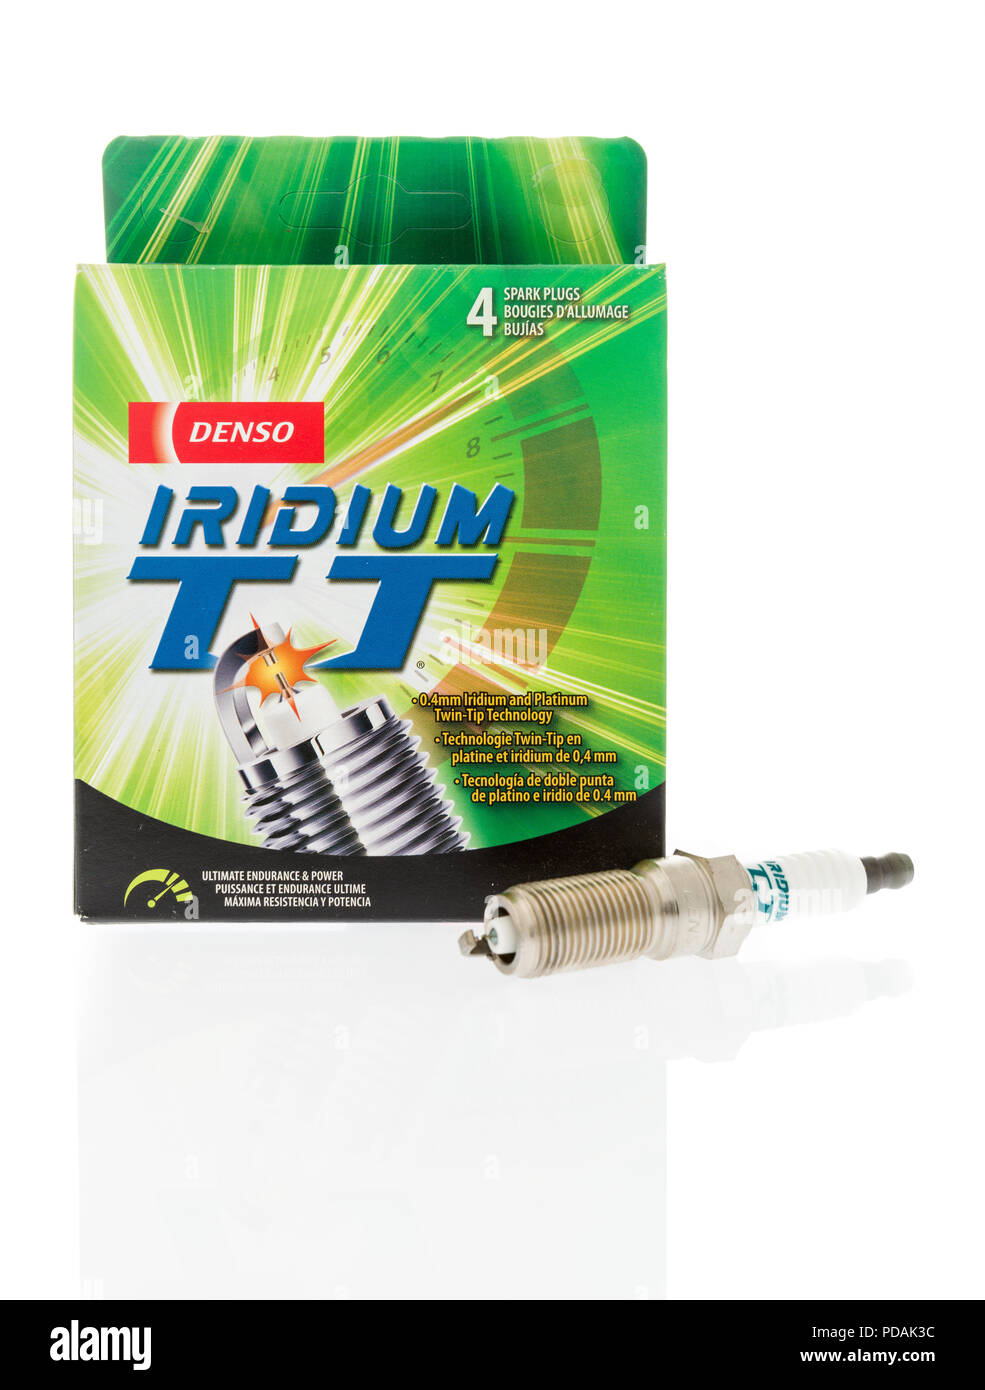 Winneconne, WI - 7 August 2018: A package of Denso Iridium spark plugs on an isolated background Stock Photo